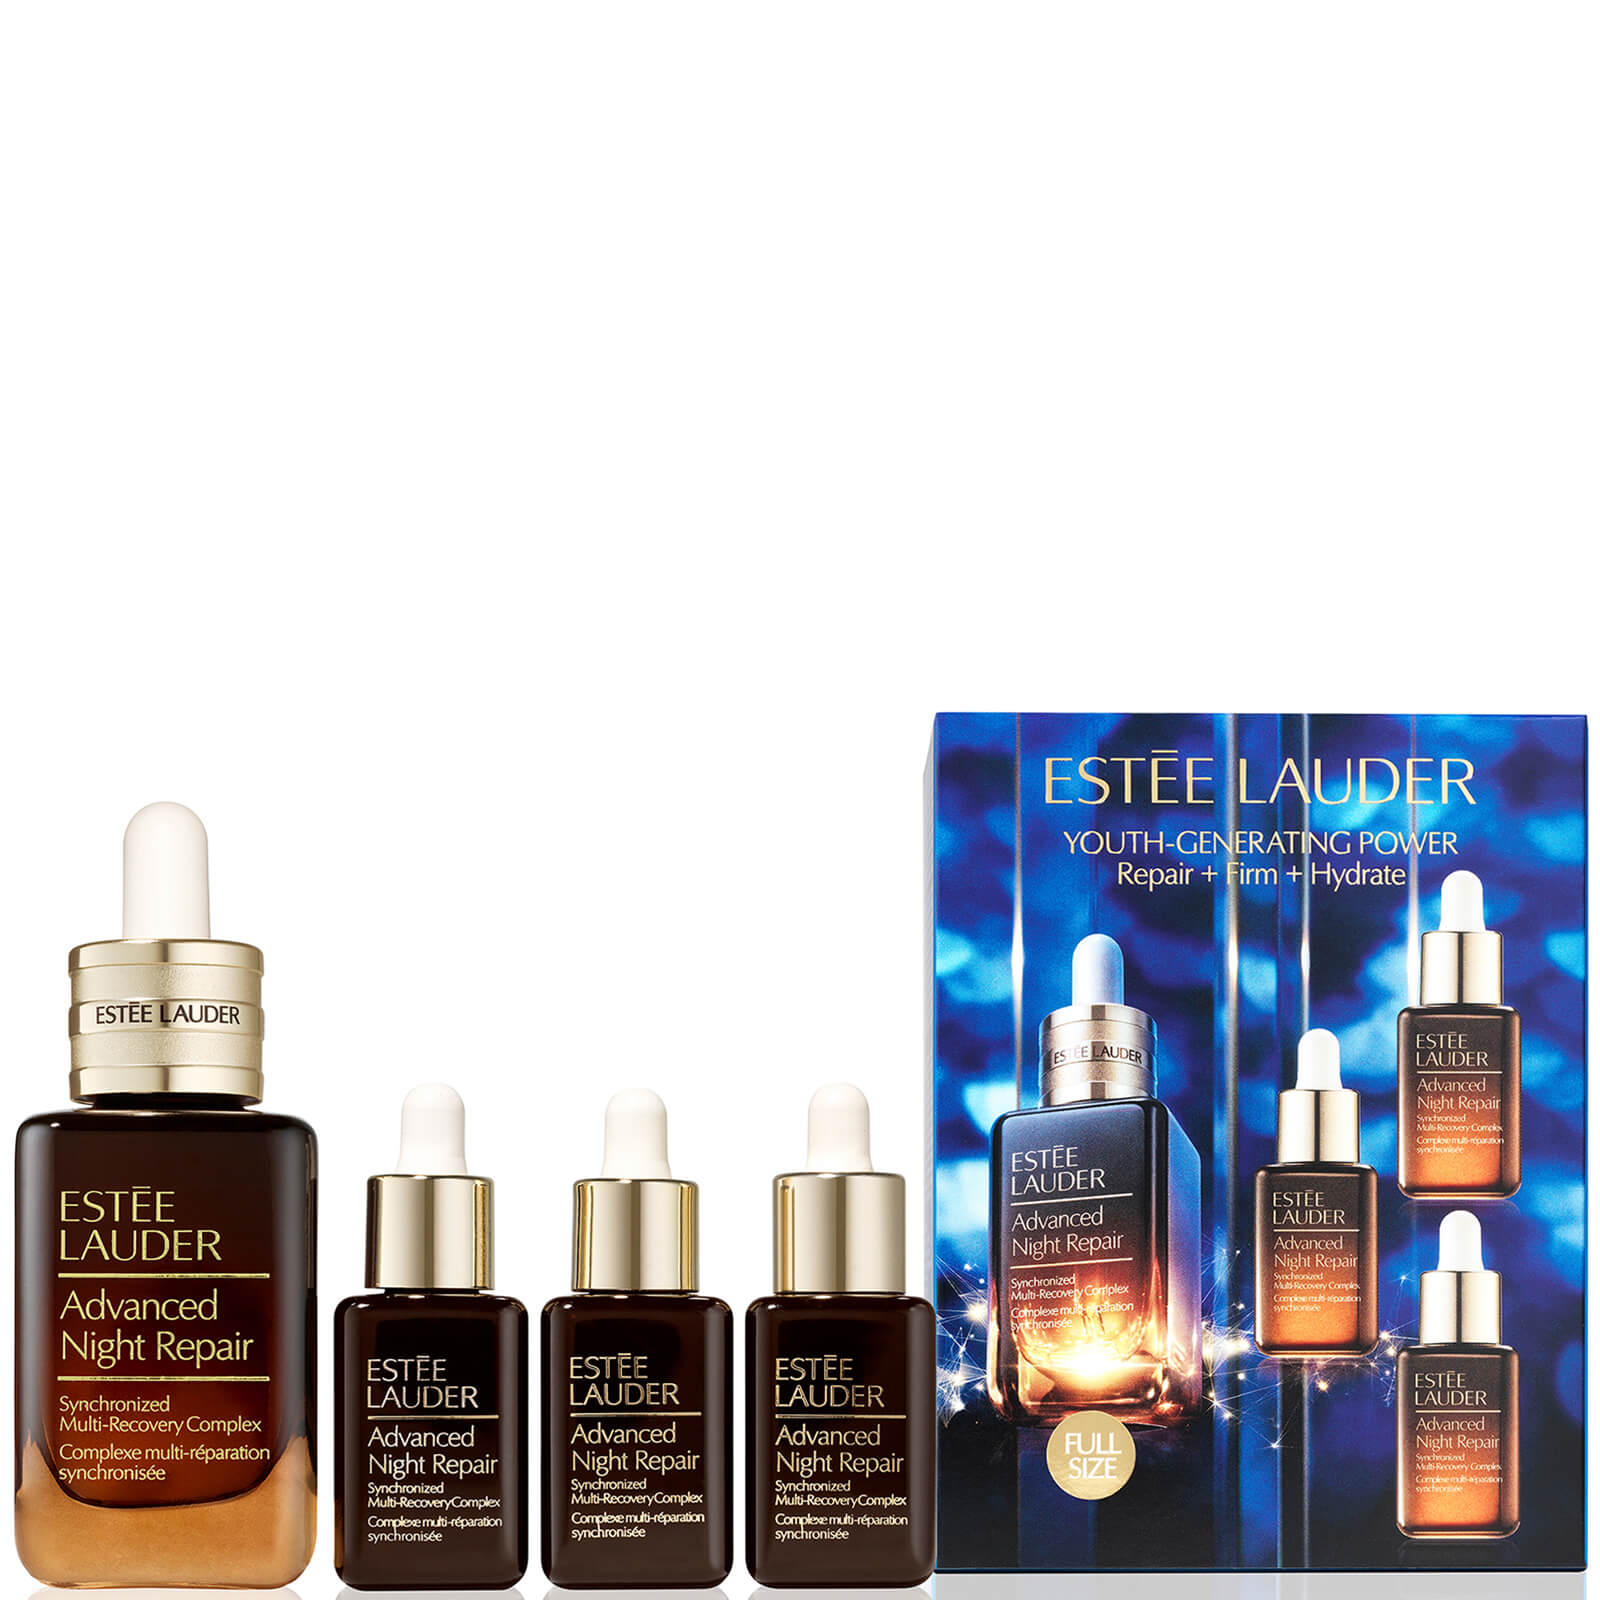 Estée Lauder Youth-Generating Advanced Night Repair Power Repair, Firm and Hydrate Gift Set (Worth £187.00)